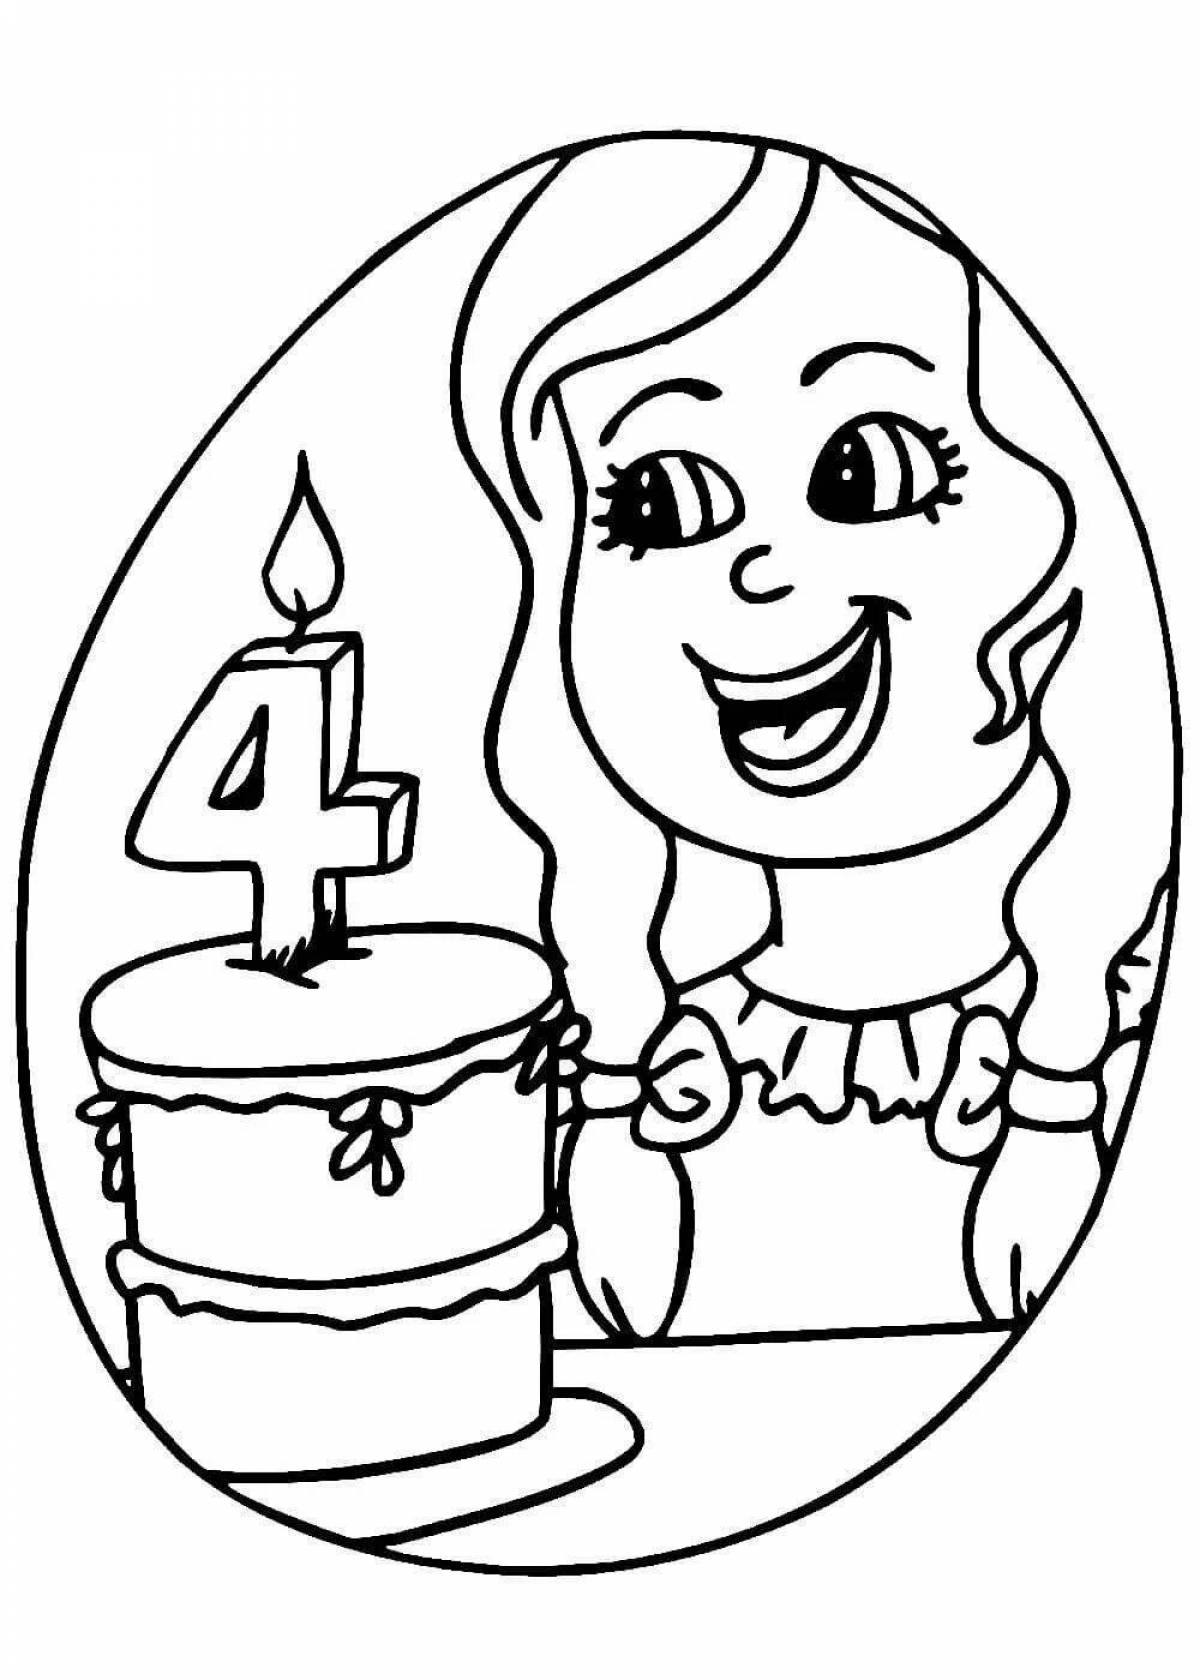 Bright happy birthday sister coloring page